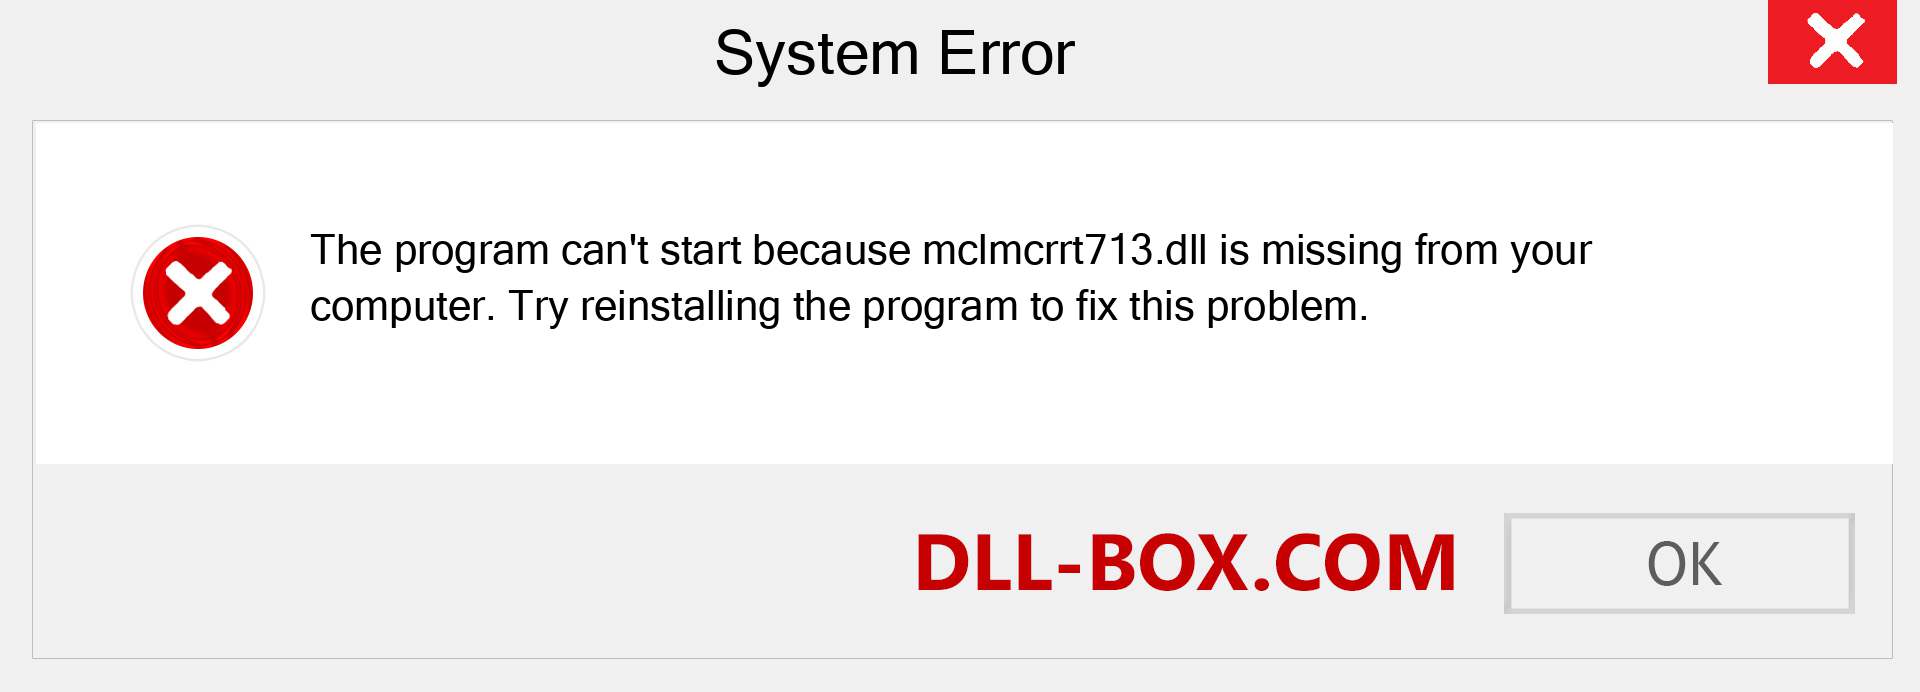  mclmcrrt713.dll file is missing?. Download for Windows 7, 8, 10 - Fix  mclmcrrt713 dll Missing Error on Windows, photos, images